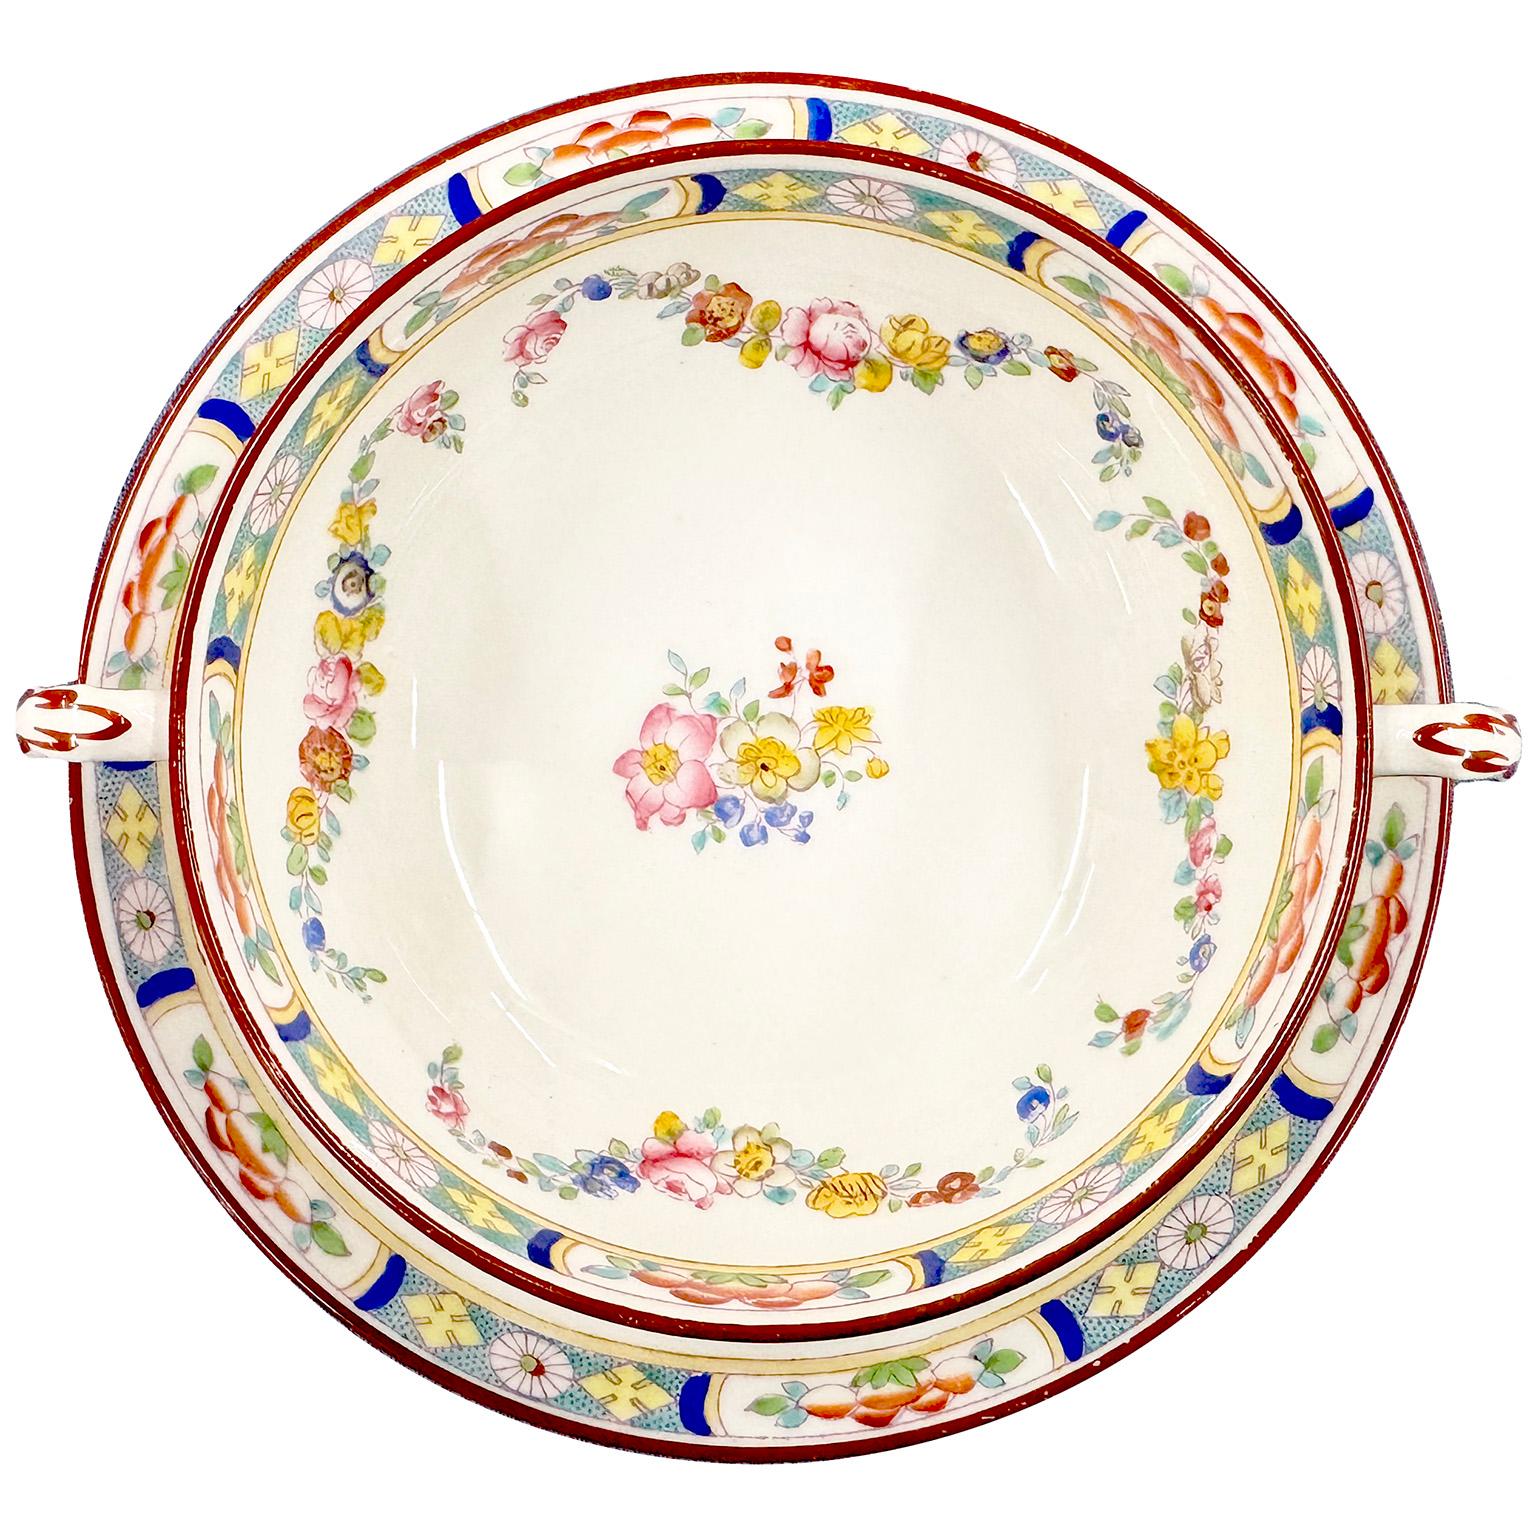 A Set of 7 English Hand-Decorated Minton Fine China Soup Consommé Bowls with Saucers. The beautifully vibrant color hand painted Soup or Consommé bowls, each double handled bowl and saucer plates decorated with a colorful floral design, an intricate